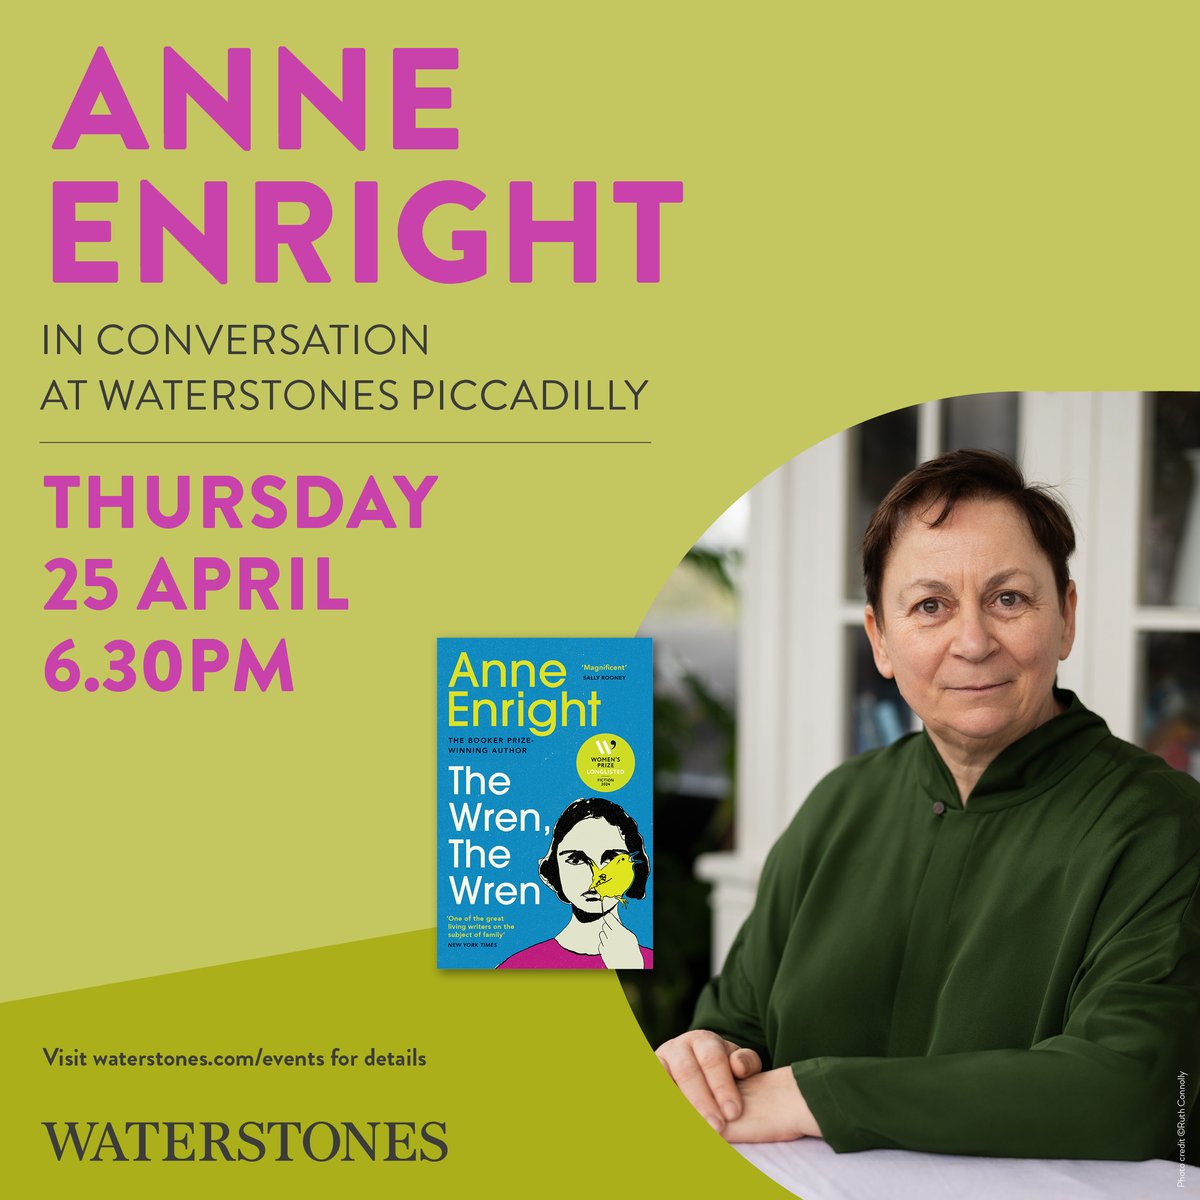 Don't miss Anne Enright in the flesh at @WaterstonesPicc on Thursday 25 April in conversation about her latest novel, THE WREN, THE WREN. 🎫eventbrite.co.uk/e/anne-enright…